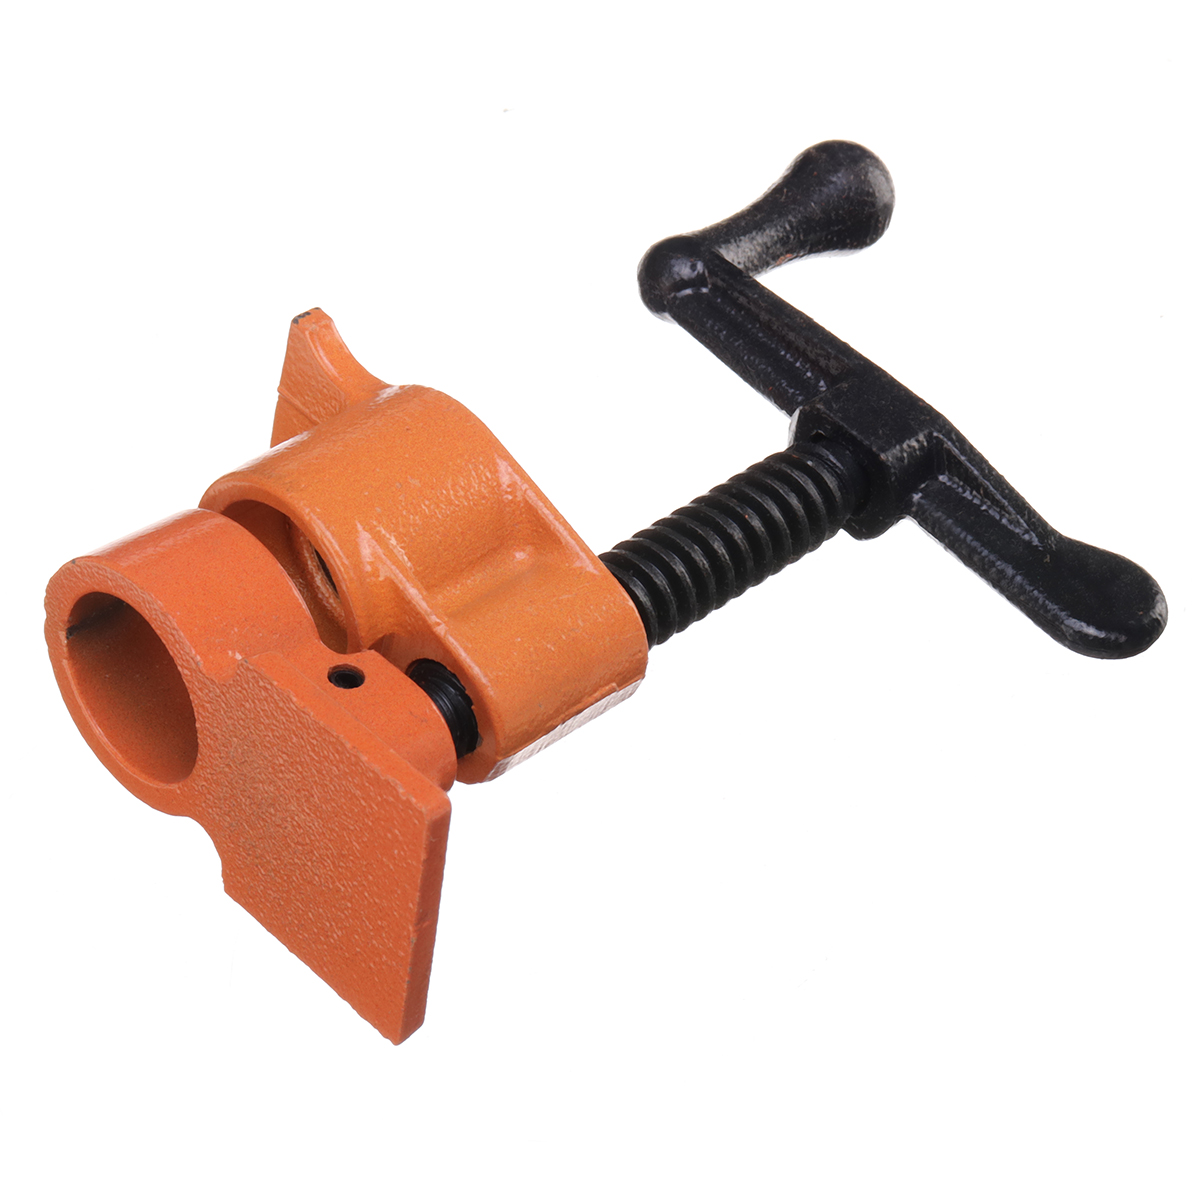 Wood-Gluing-Pipe-Clamp-34-Inch-Heavy-Duty-Woodworking-Cast-Iron-Pipe-Clamp-1471416-9